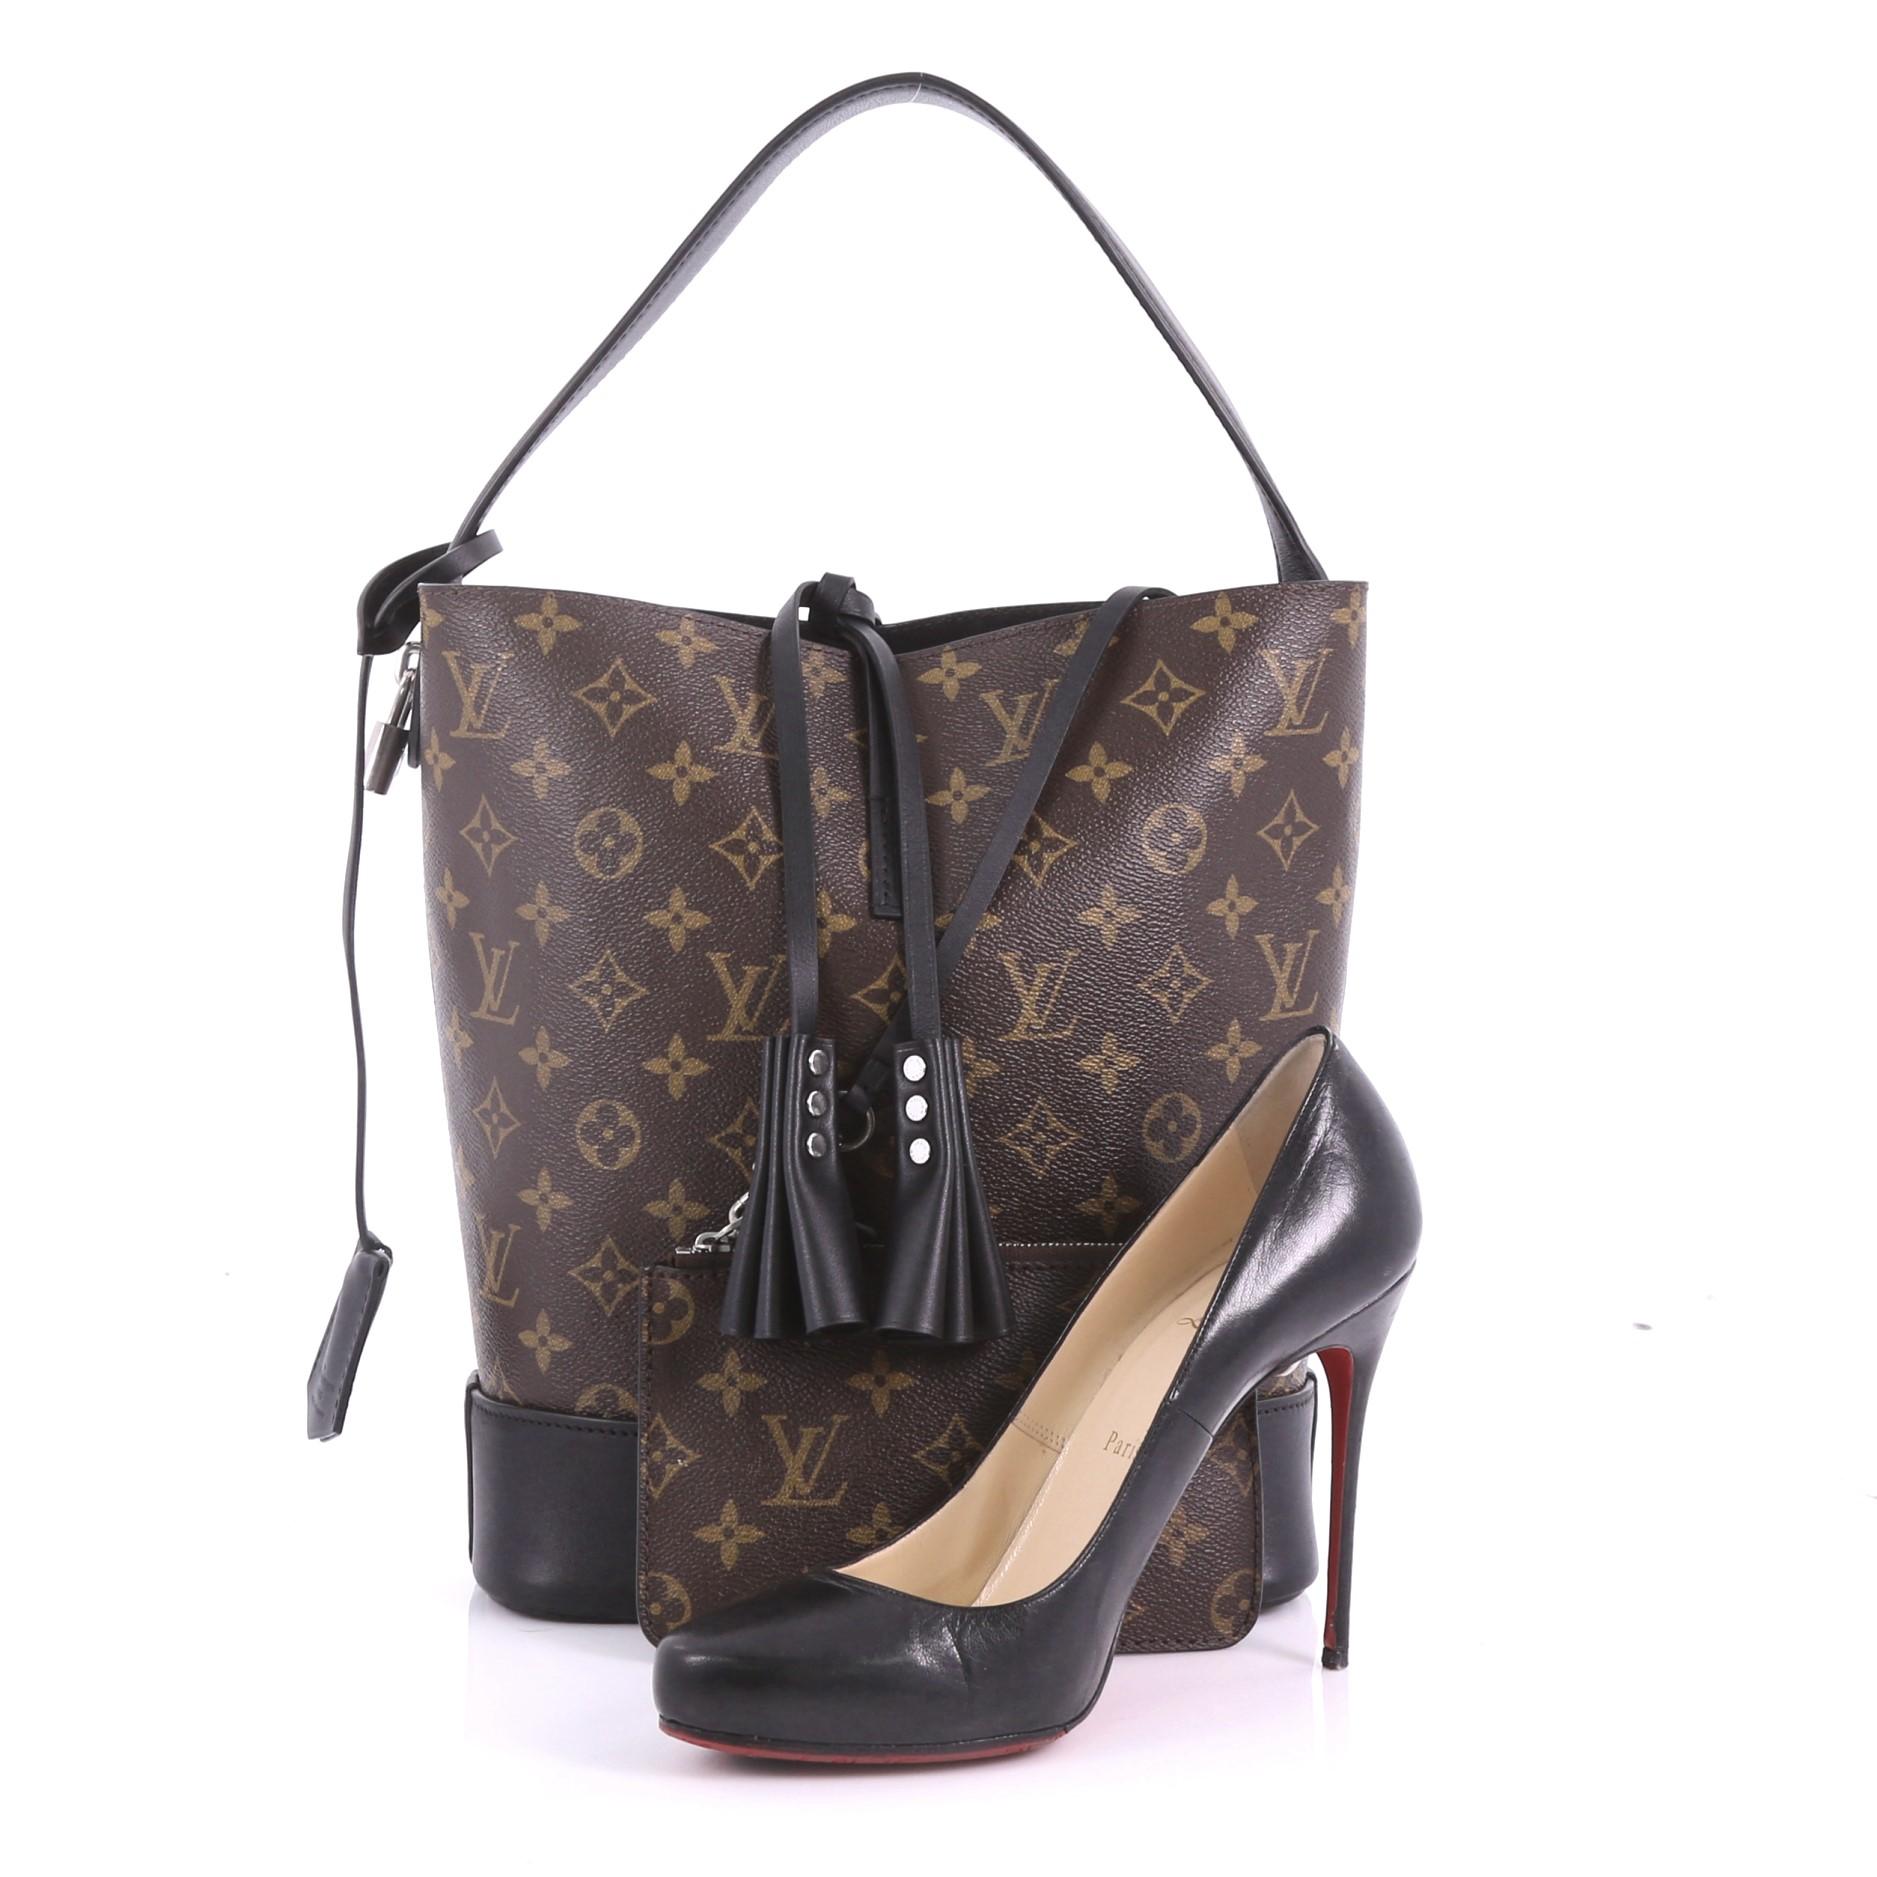 This Louis Vuitton NN14 Idole Bucket Bag Monogram Canvas and Leather GM, crafted from brown monogram coated canvas and black leather, features hand-pleated leather tassels, flat handle, and silver-tone hardware. It opens to a black microfiber